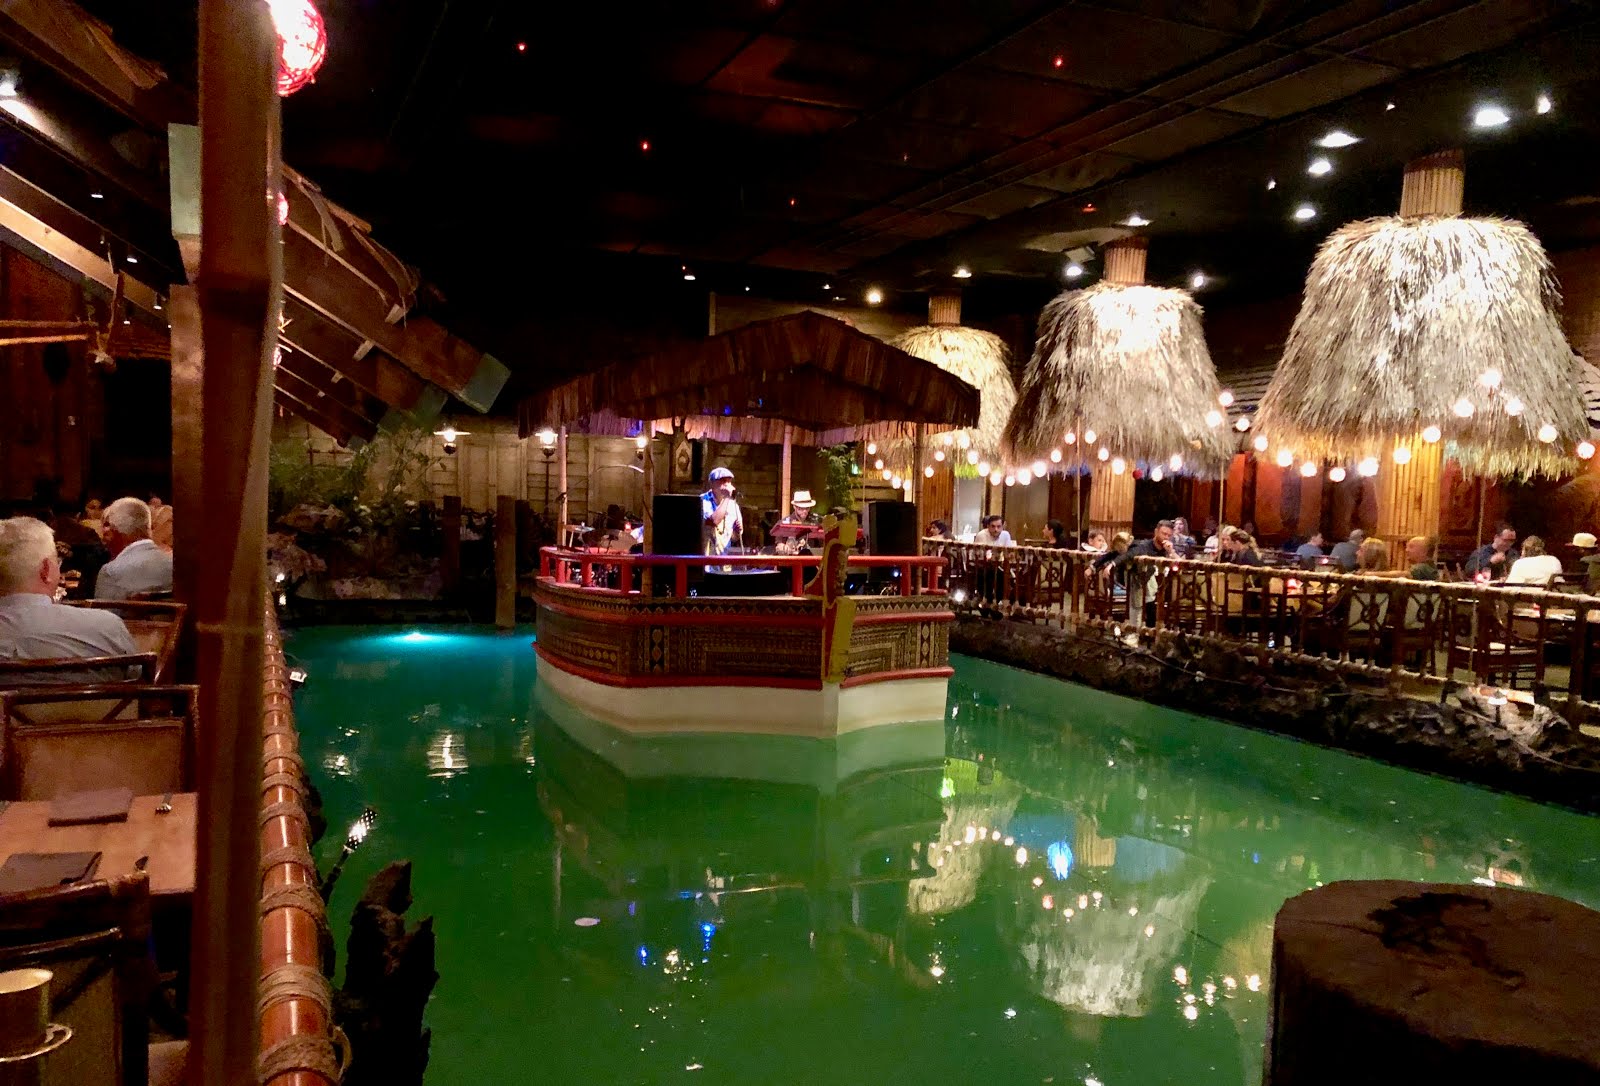 The Fairmont Hotel Tiki Room_Basement Restaurant_What to Do in SF_Secret Spots in San Francisco_Adrienne Nguyen